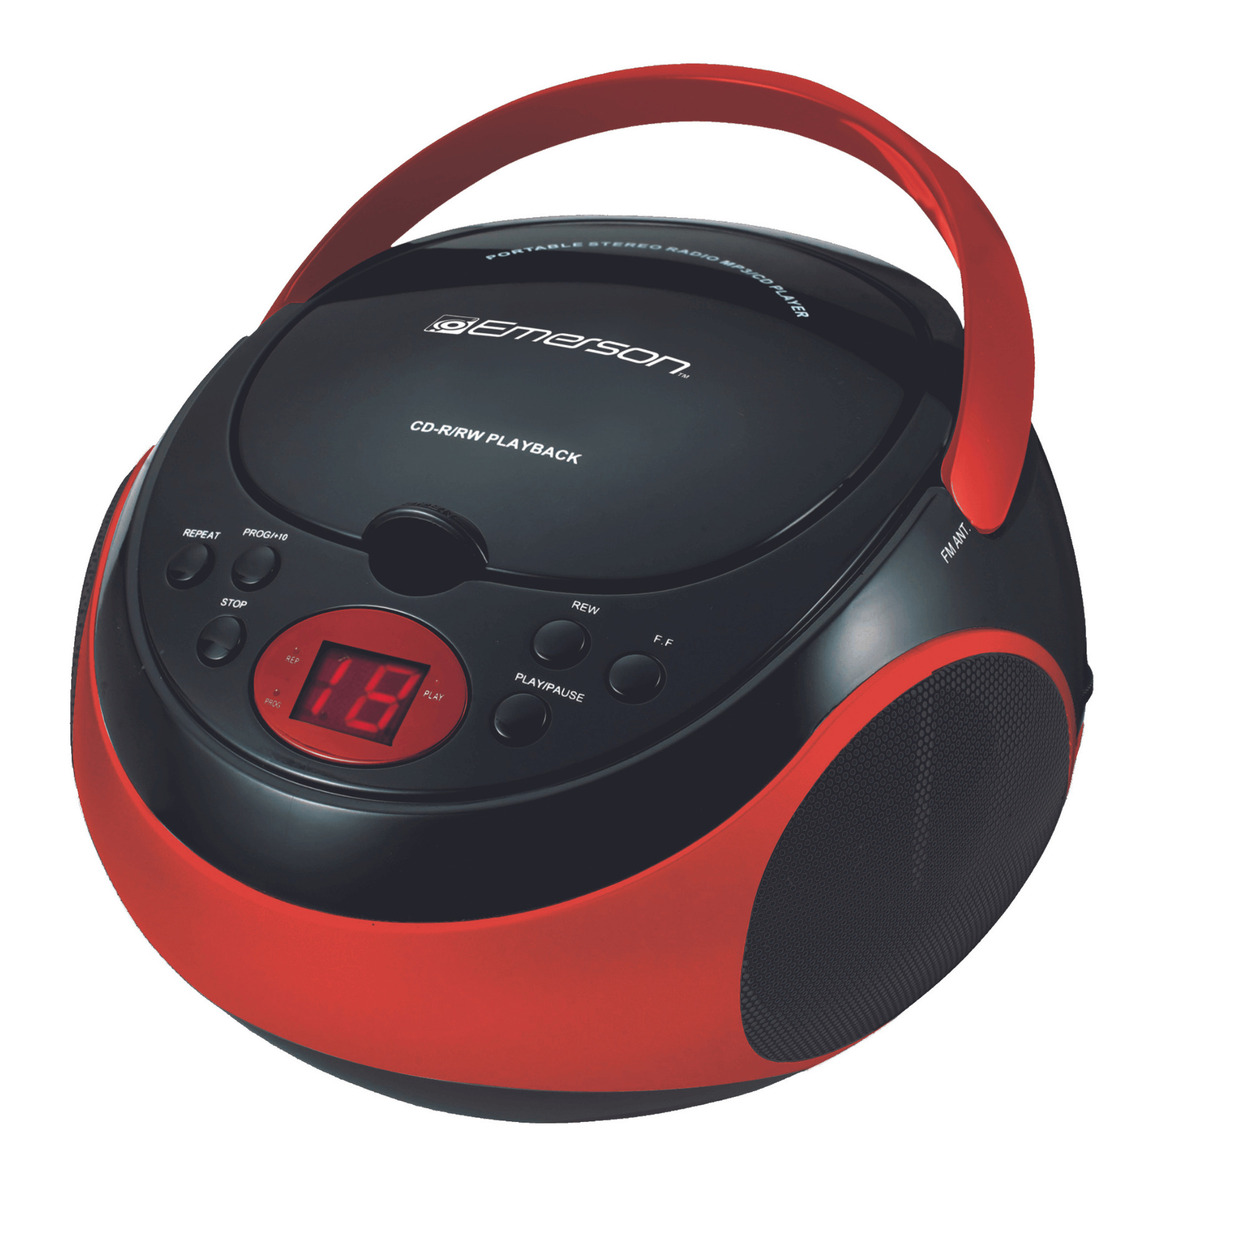 Emerson Portable CD Player / Radio - Red